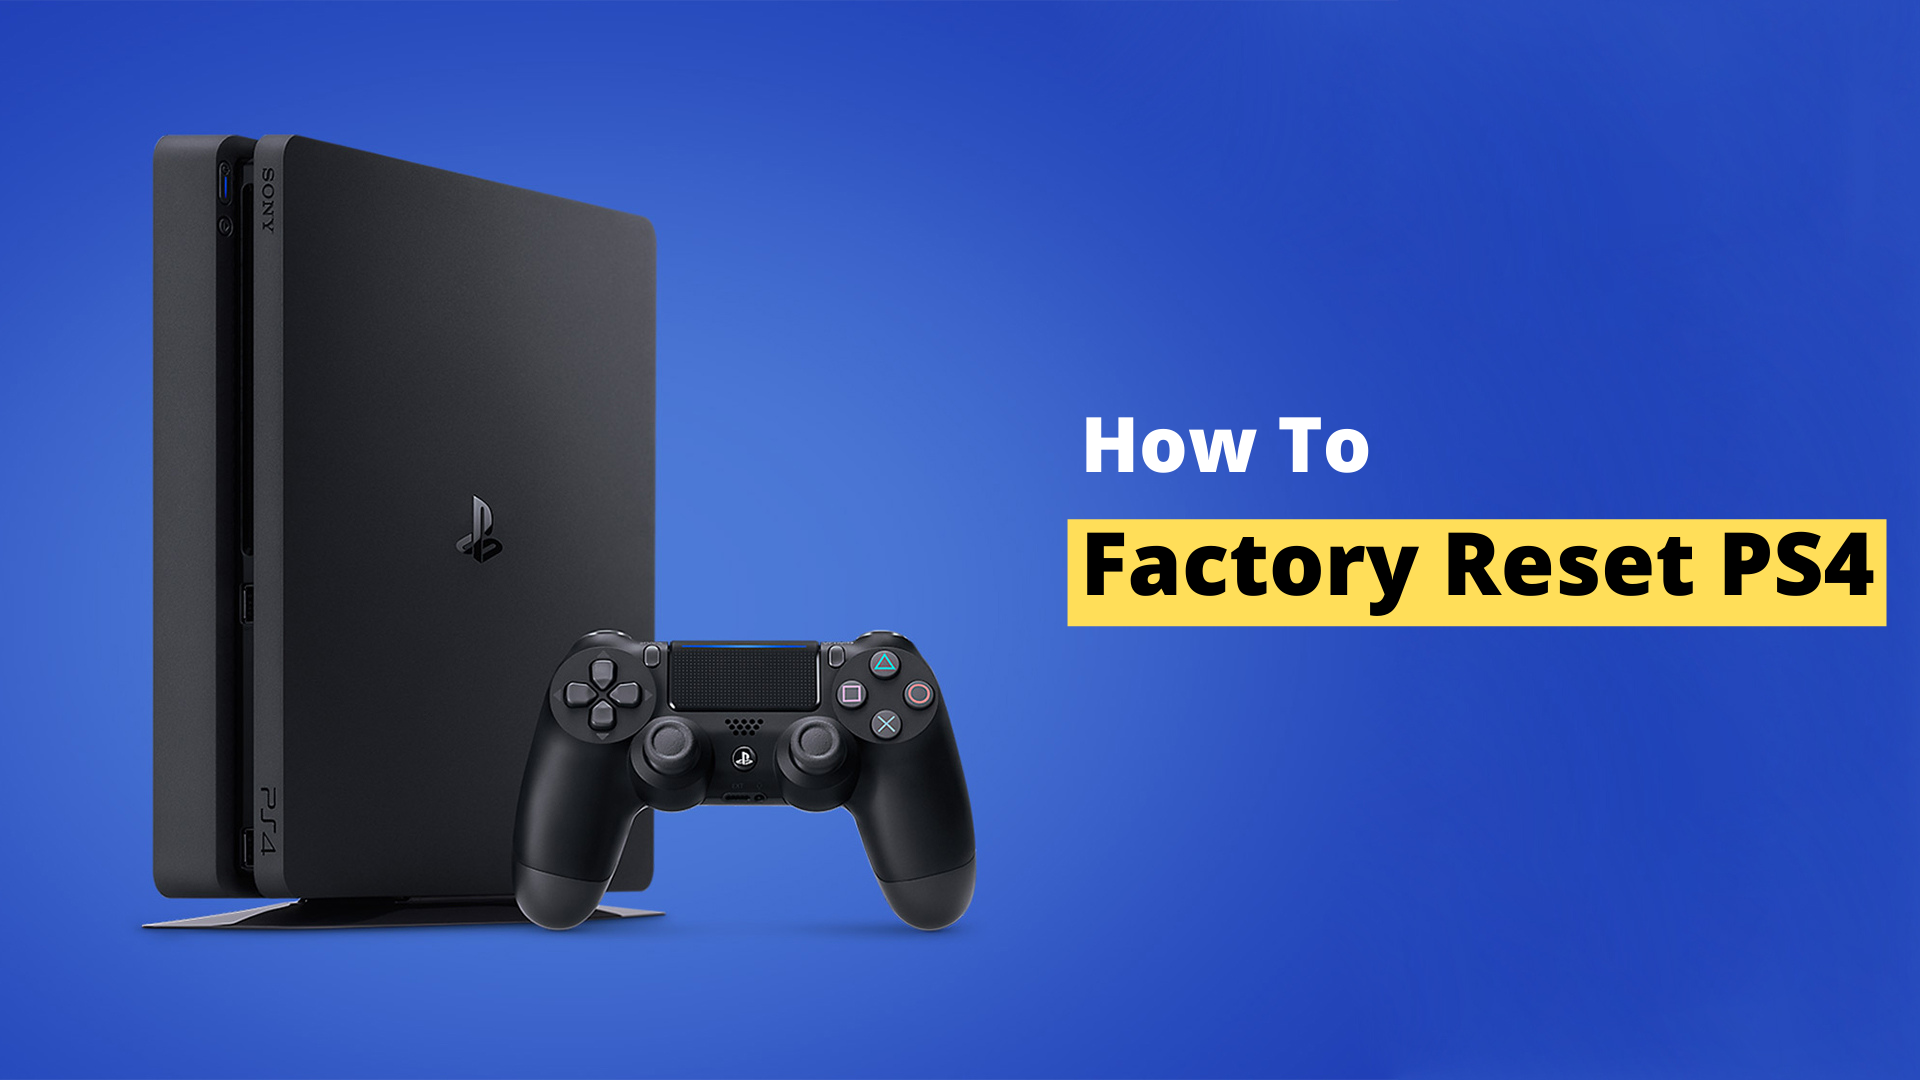 How To Factory Reset PS4